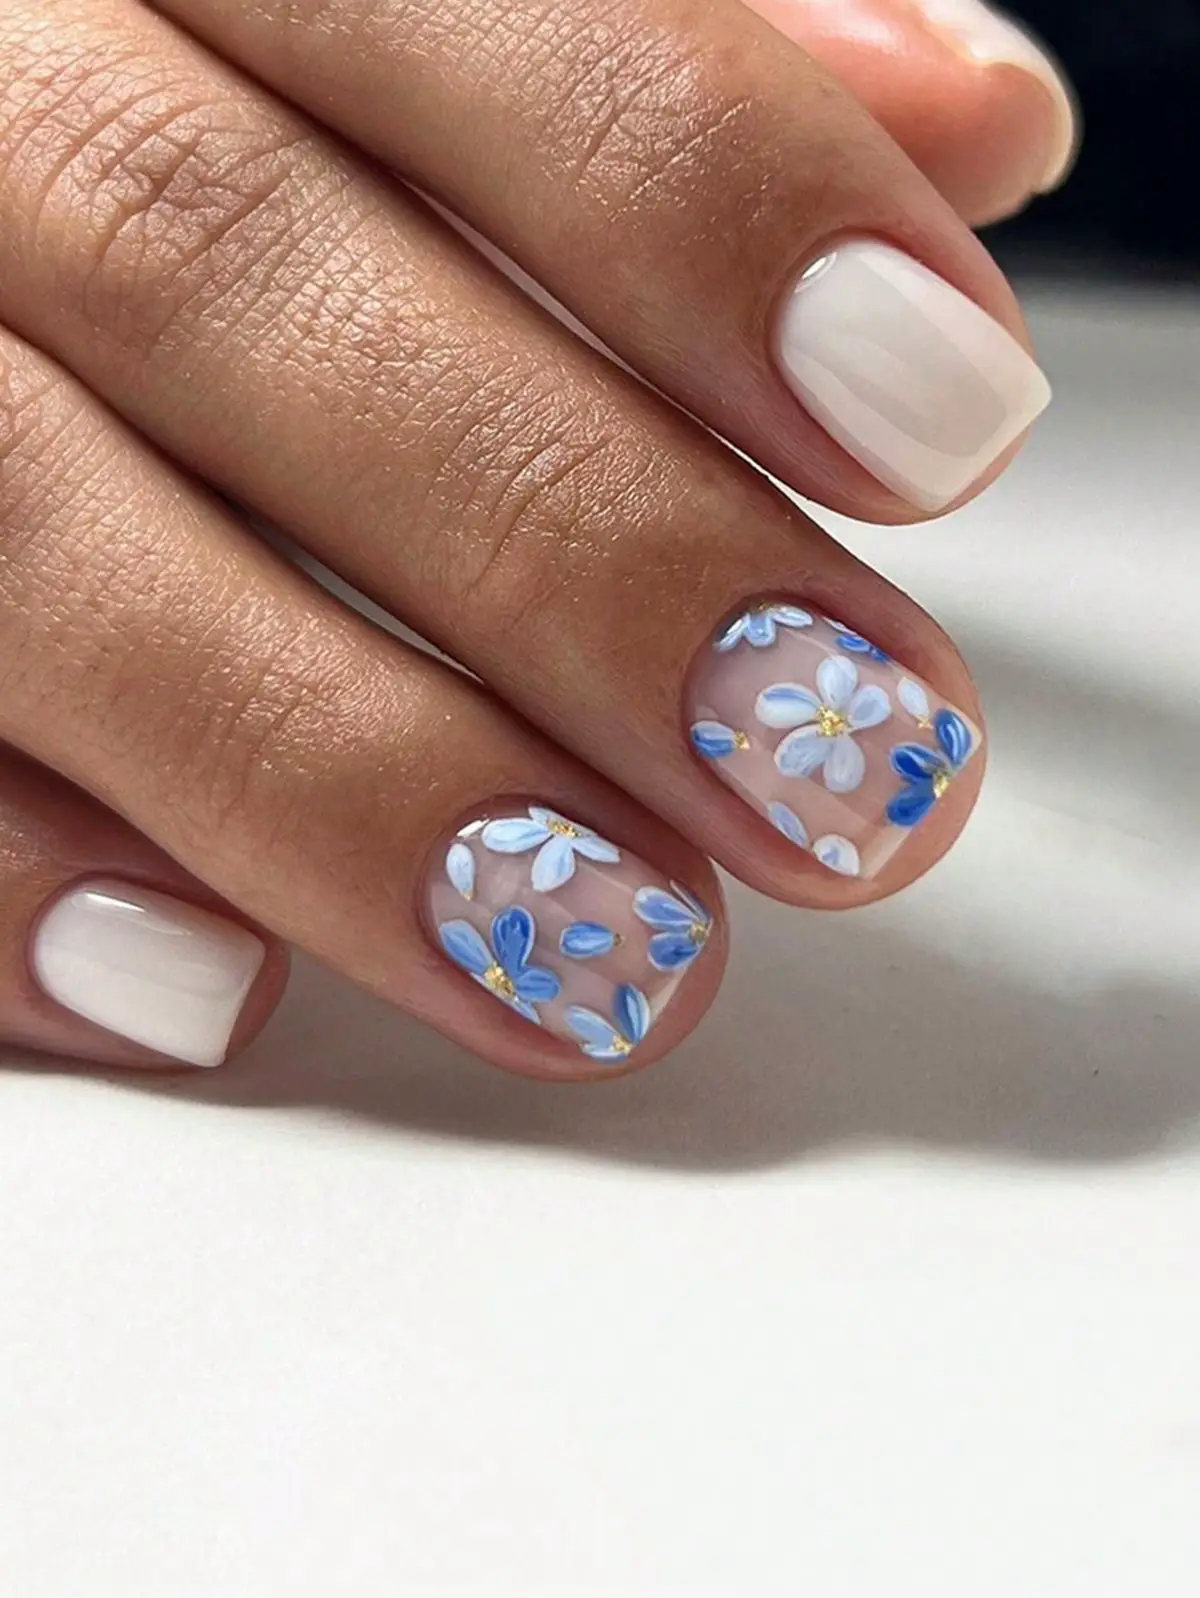  A hand with a flower design on the nail.